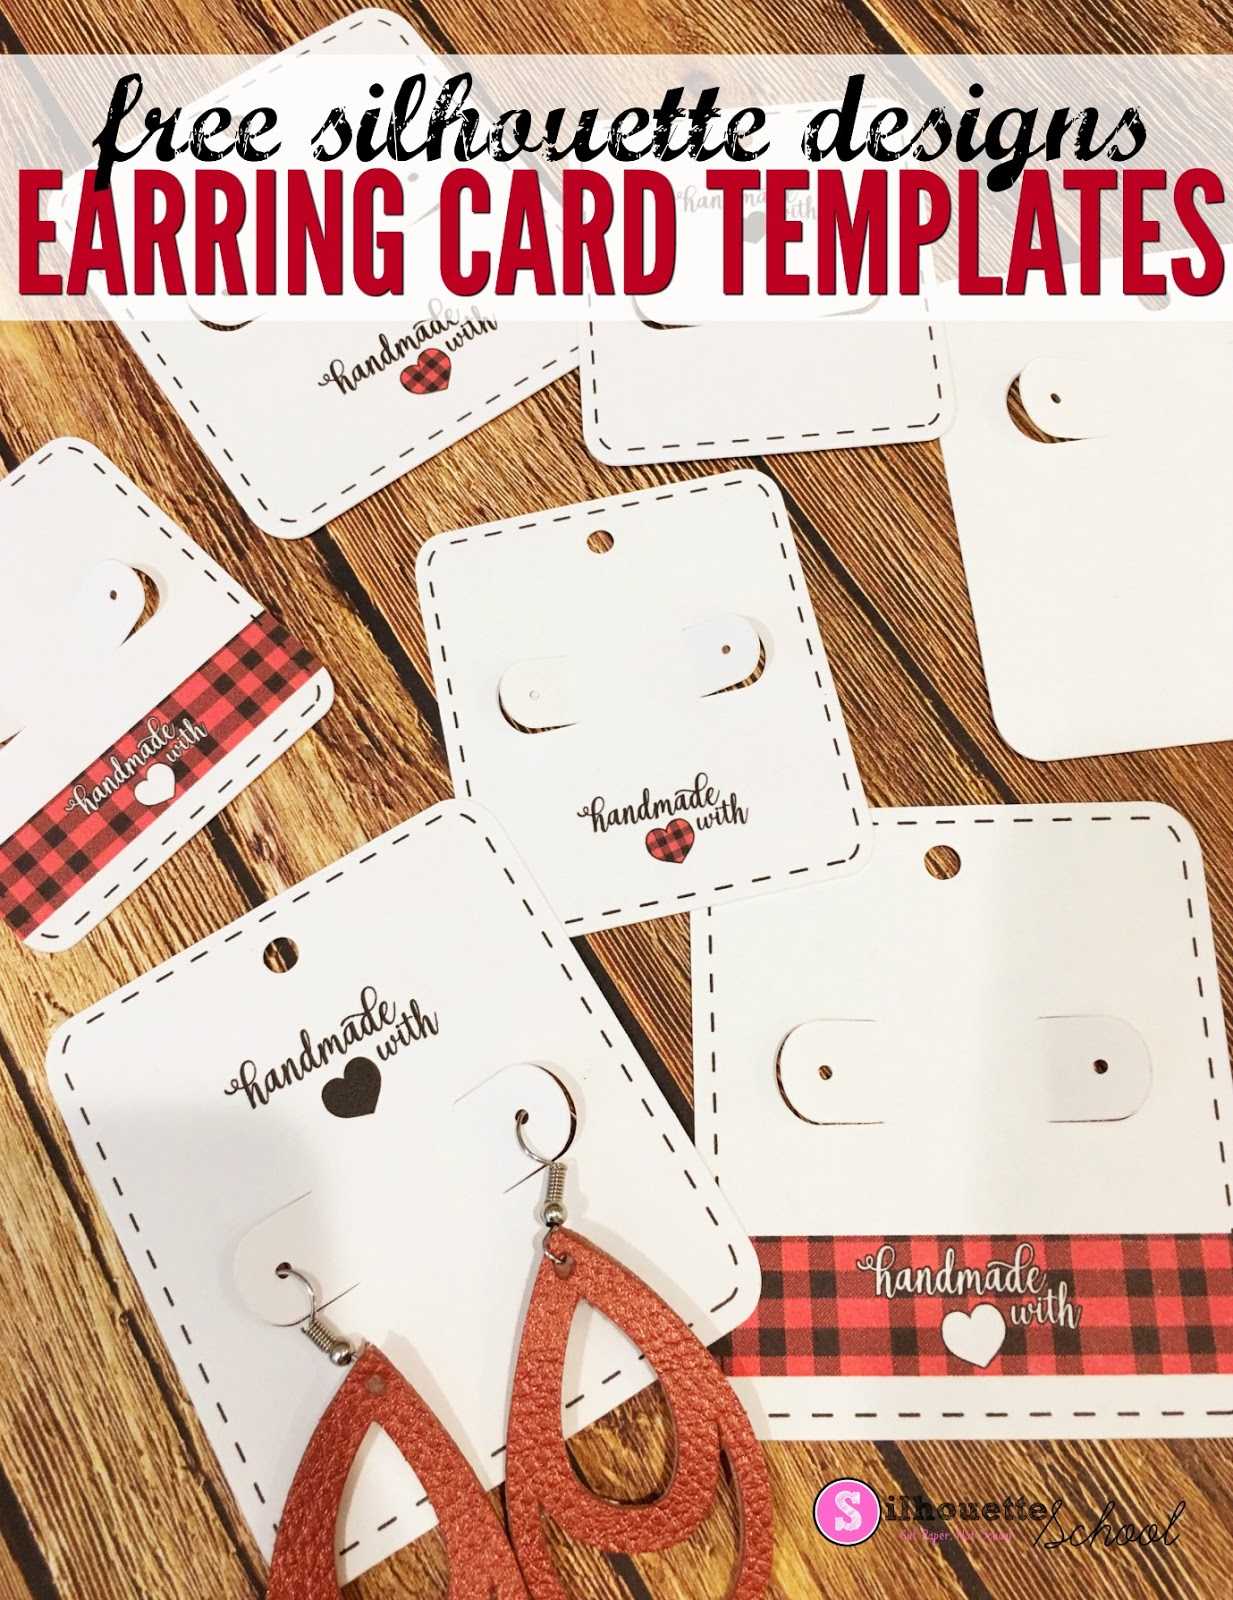 Free Silhouette Earring Card Templates (Set Of 8 With Silhouette Cameo Card Templates